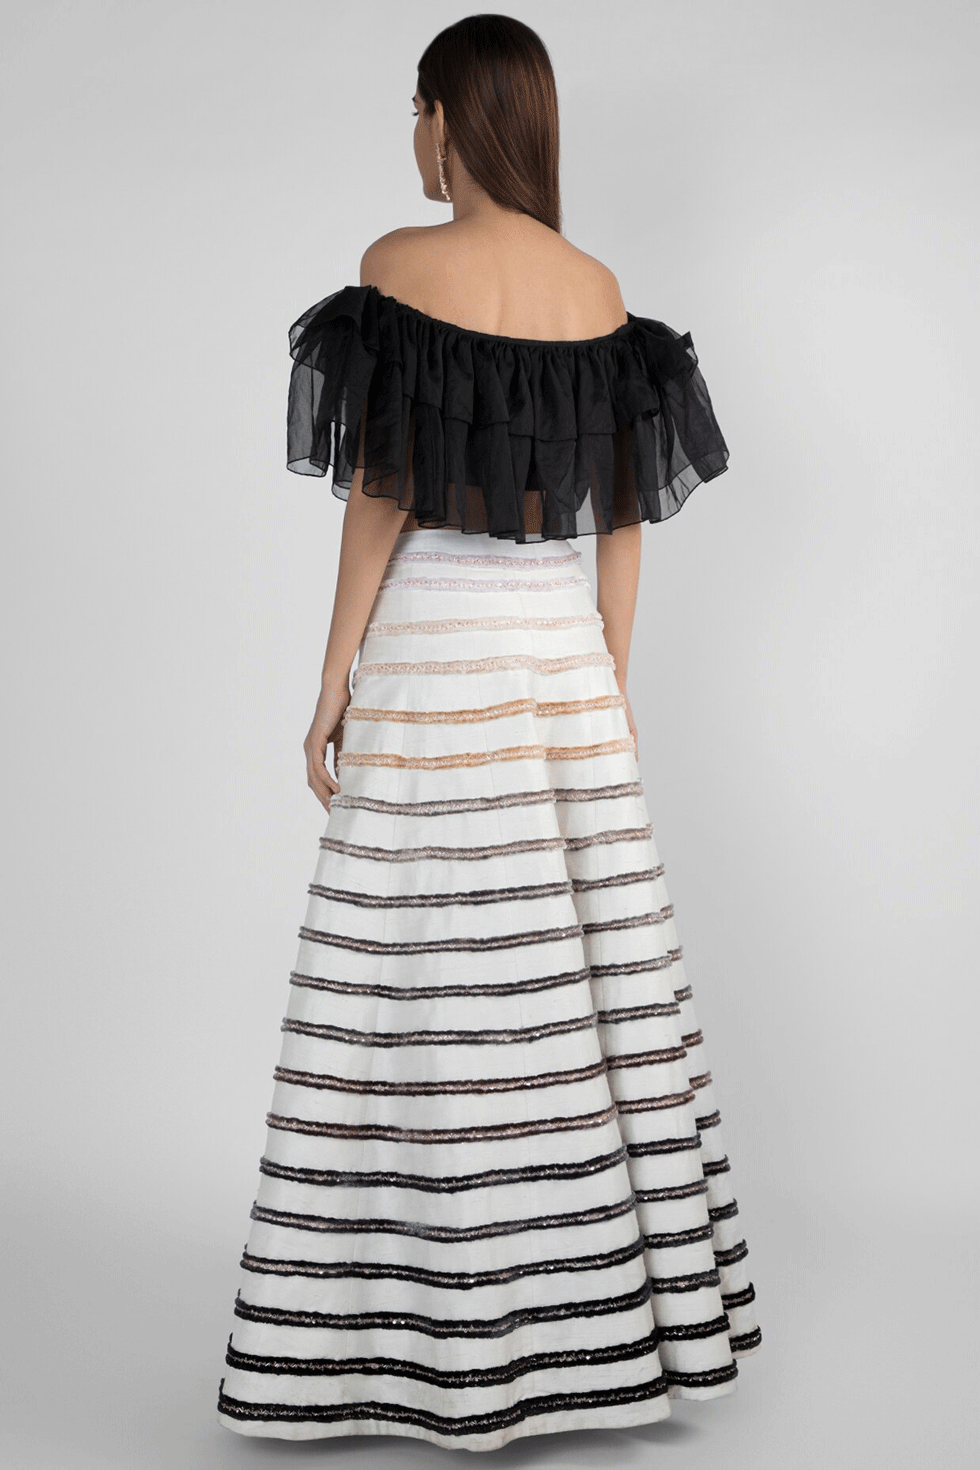 White Embroidered Skirt With Off Shoulder Ruffled Top